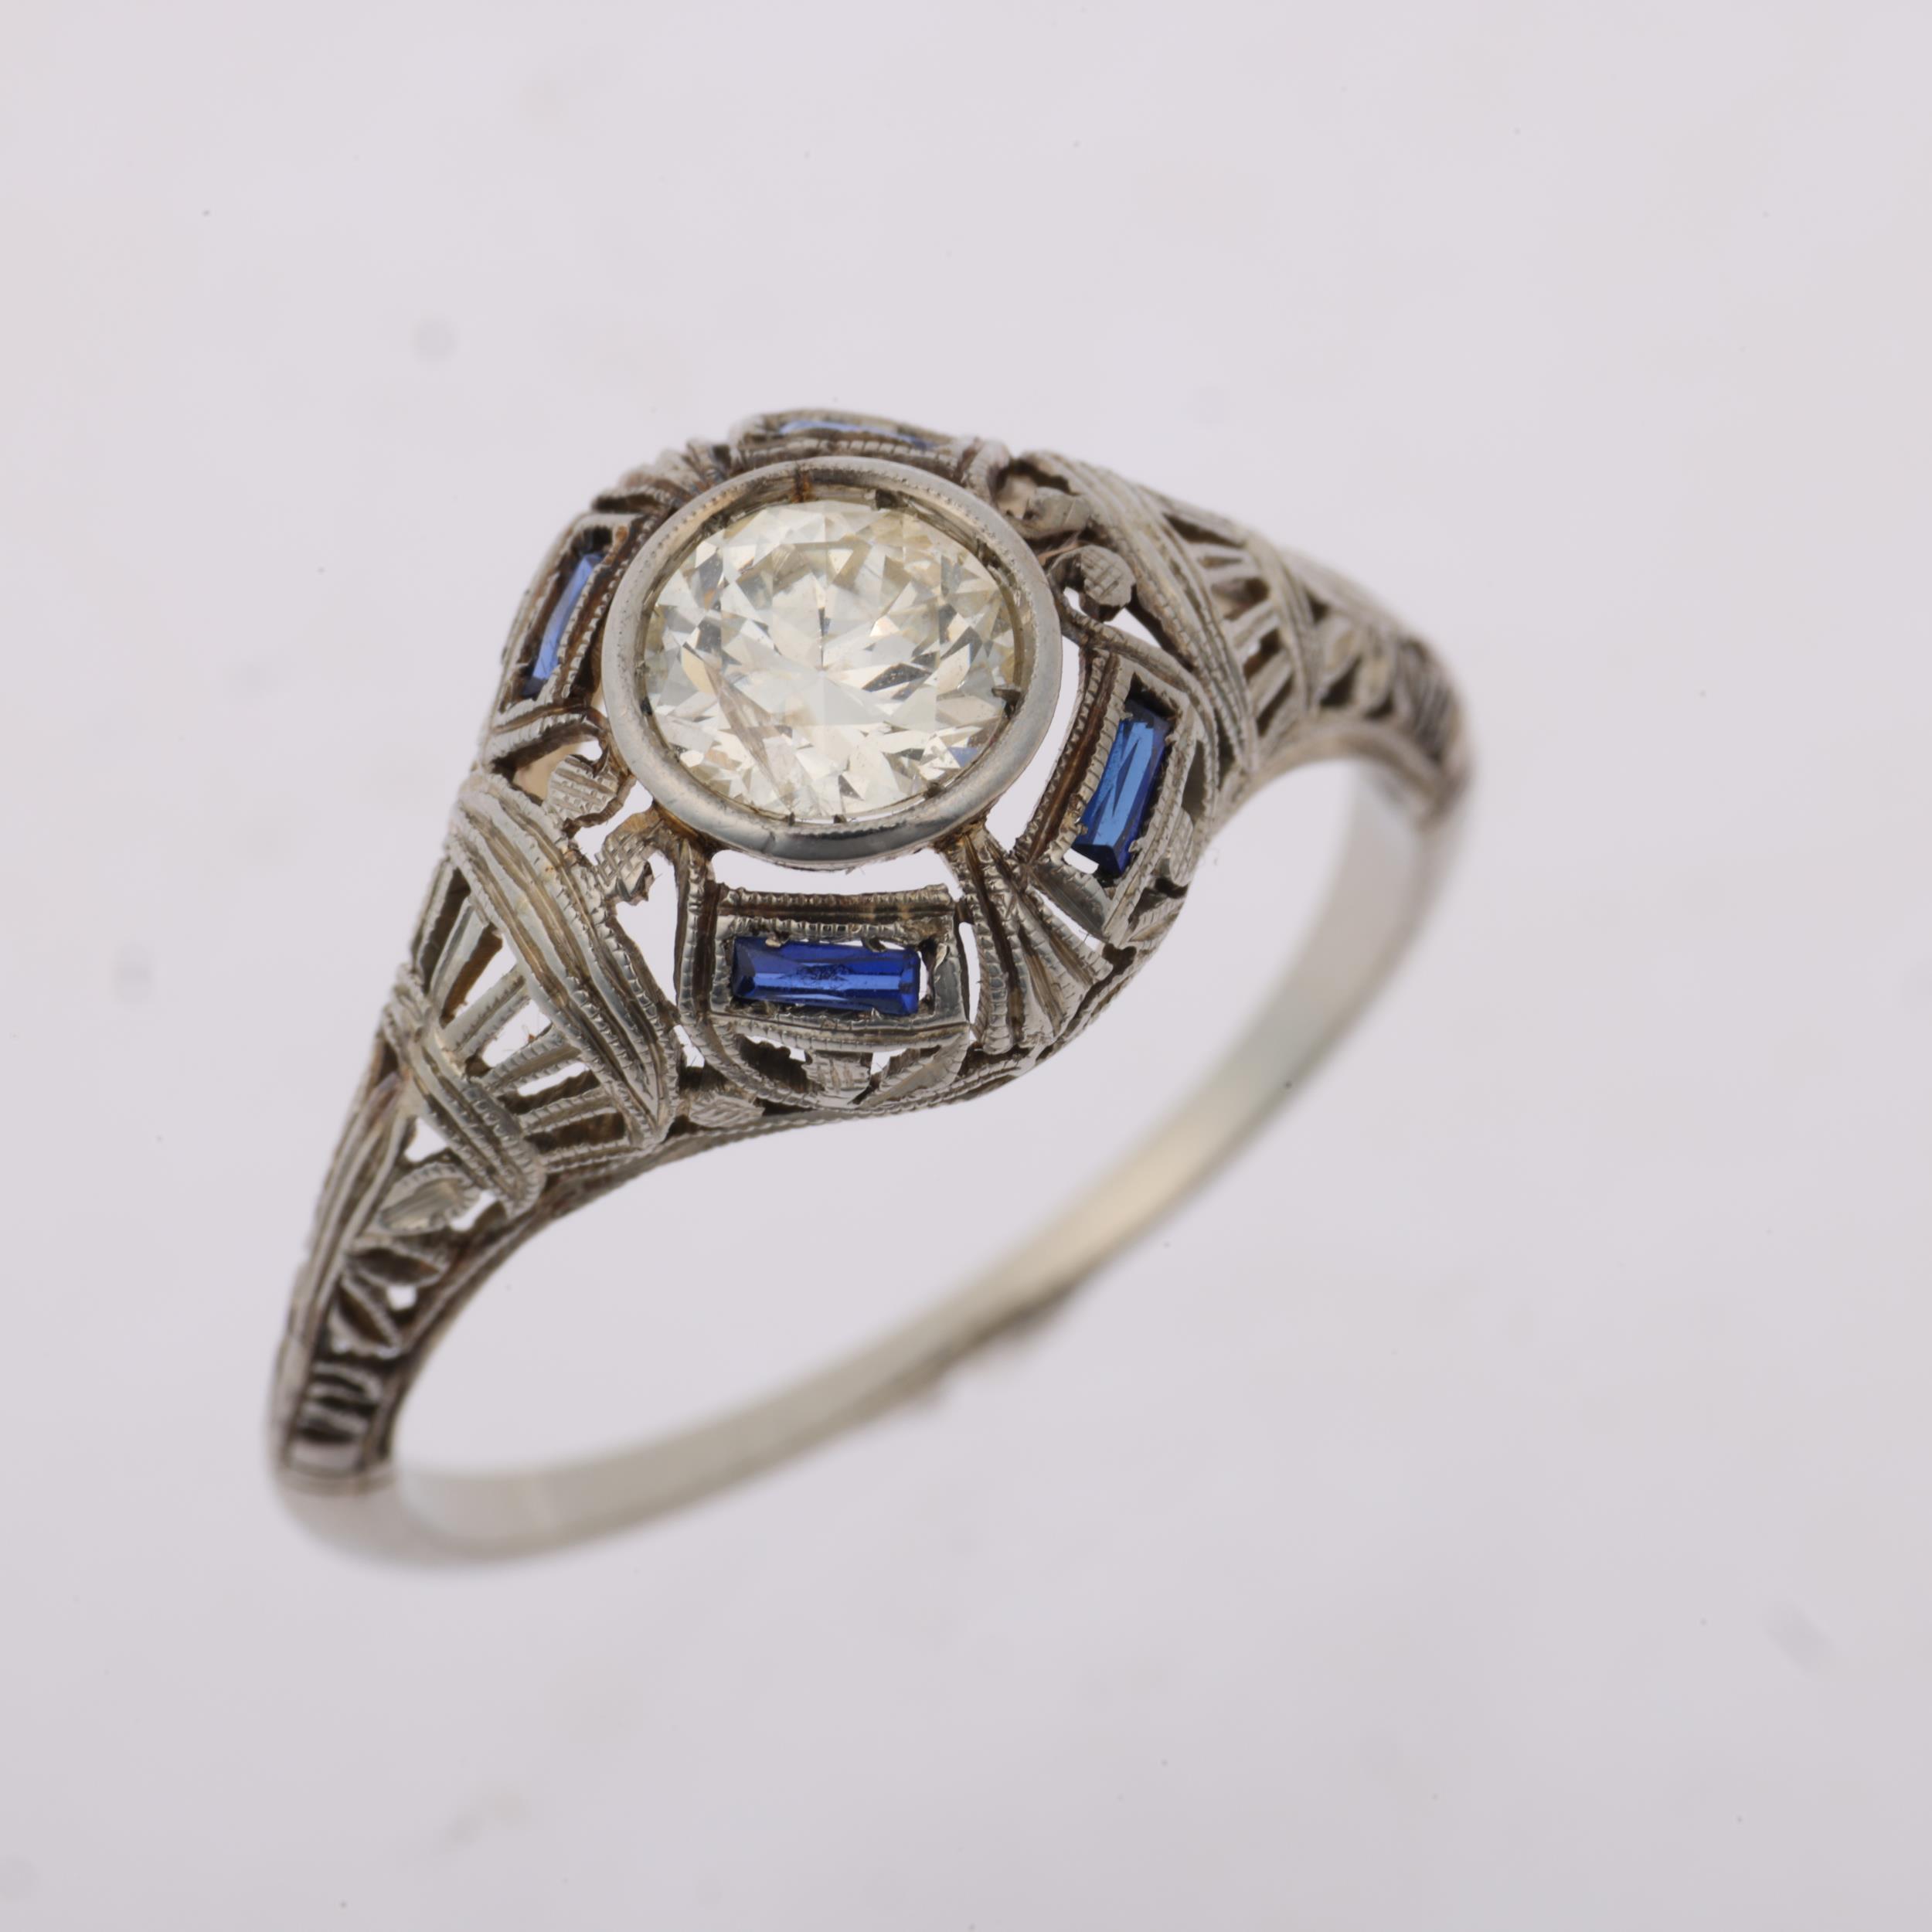 An Art Deco 0.55ct solitaire diamond ring, circa 1930, openwork scroll decoration with rectangular- - Image 2 of 4